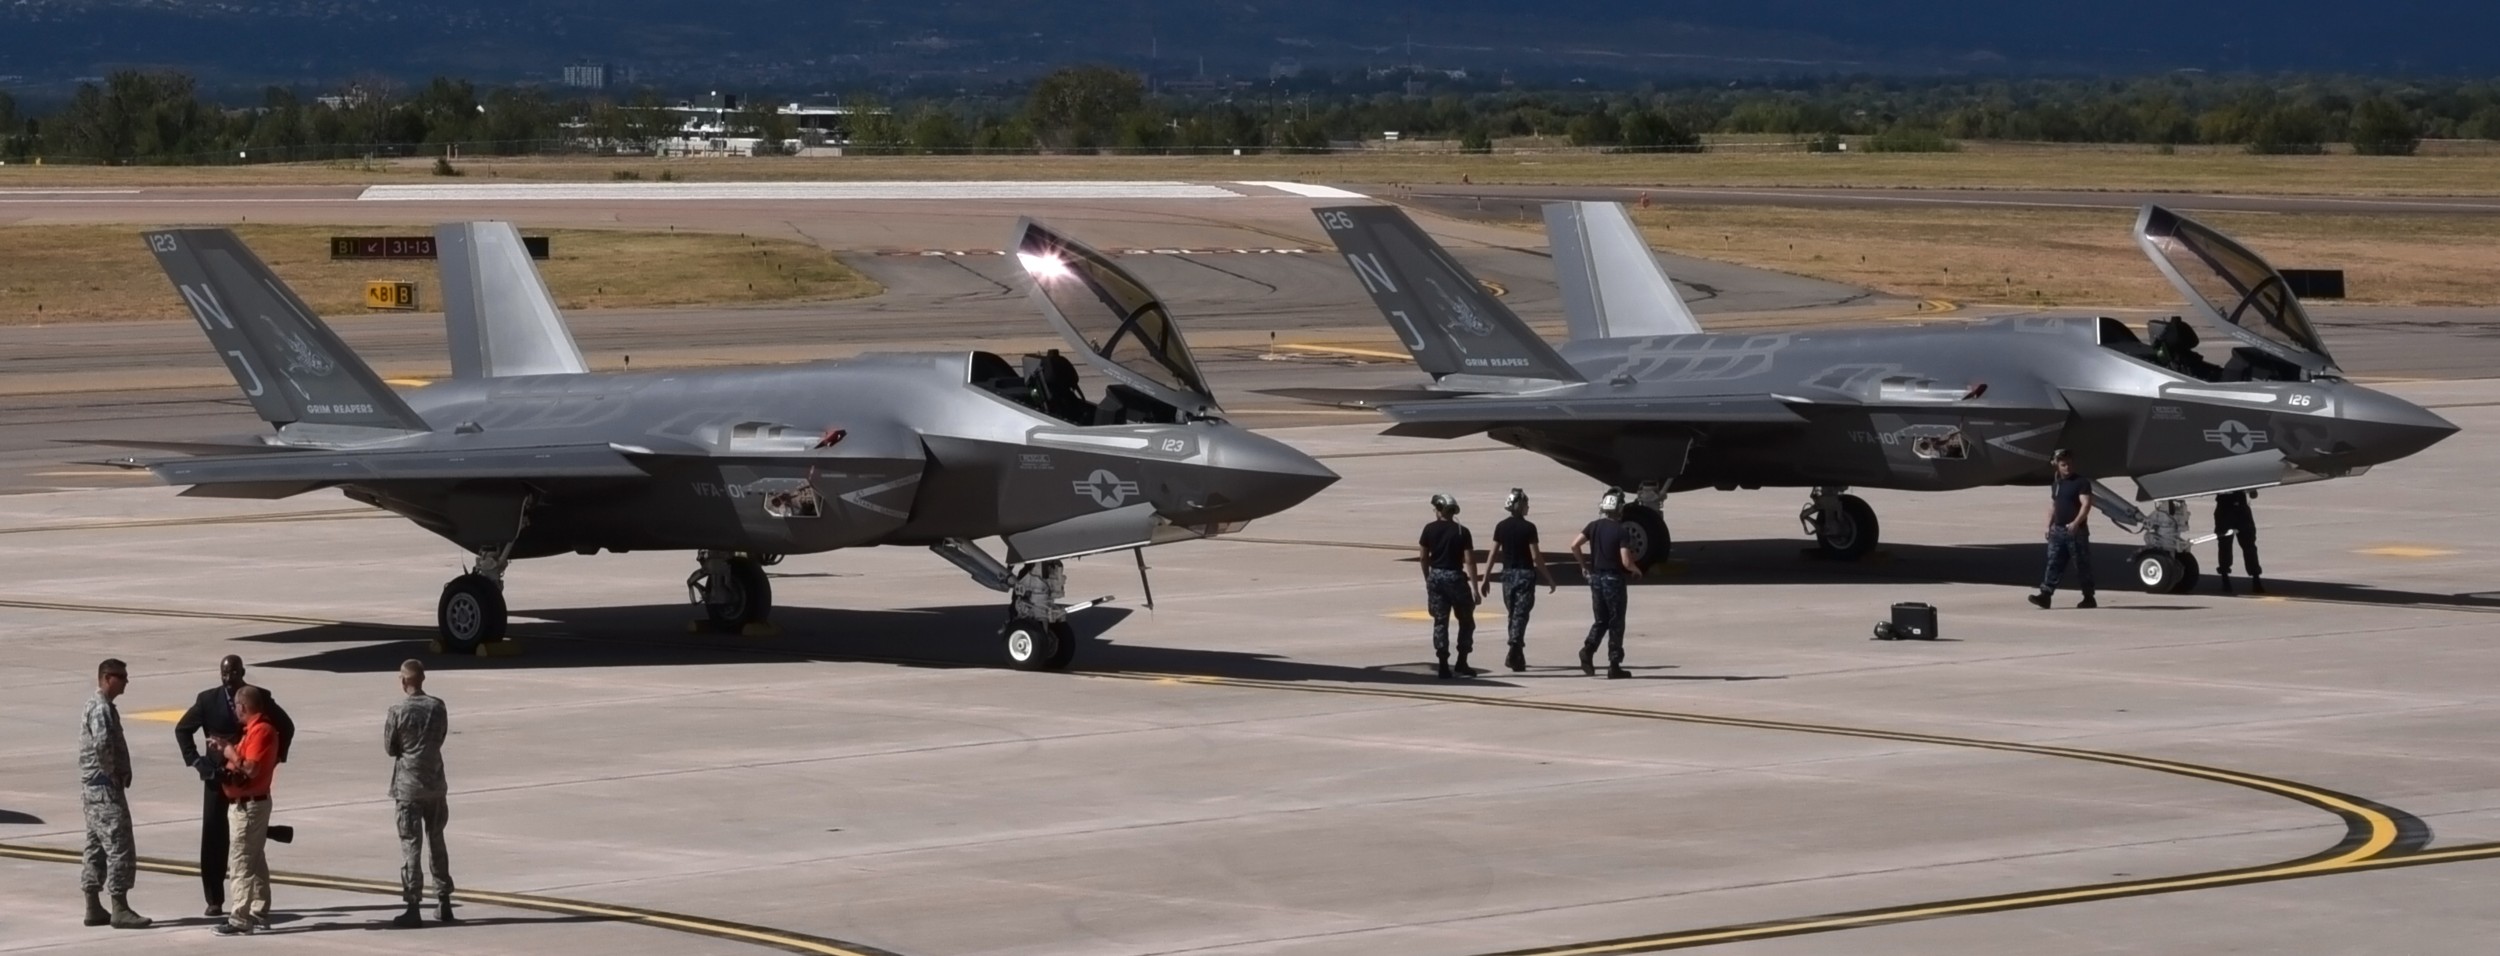 vfa-101 grim reapers strike fighter squadron us navy f-35c lightning jsf frs 33 peterson afb colorado